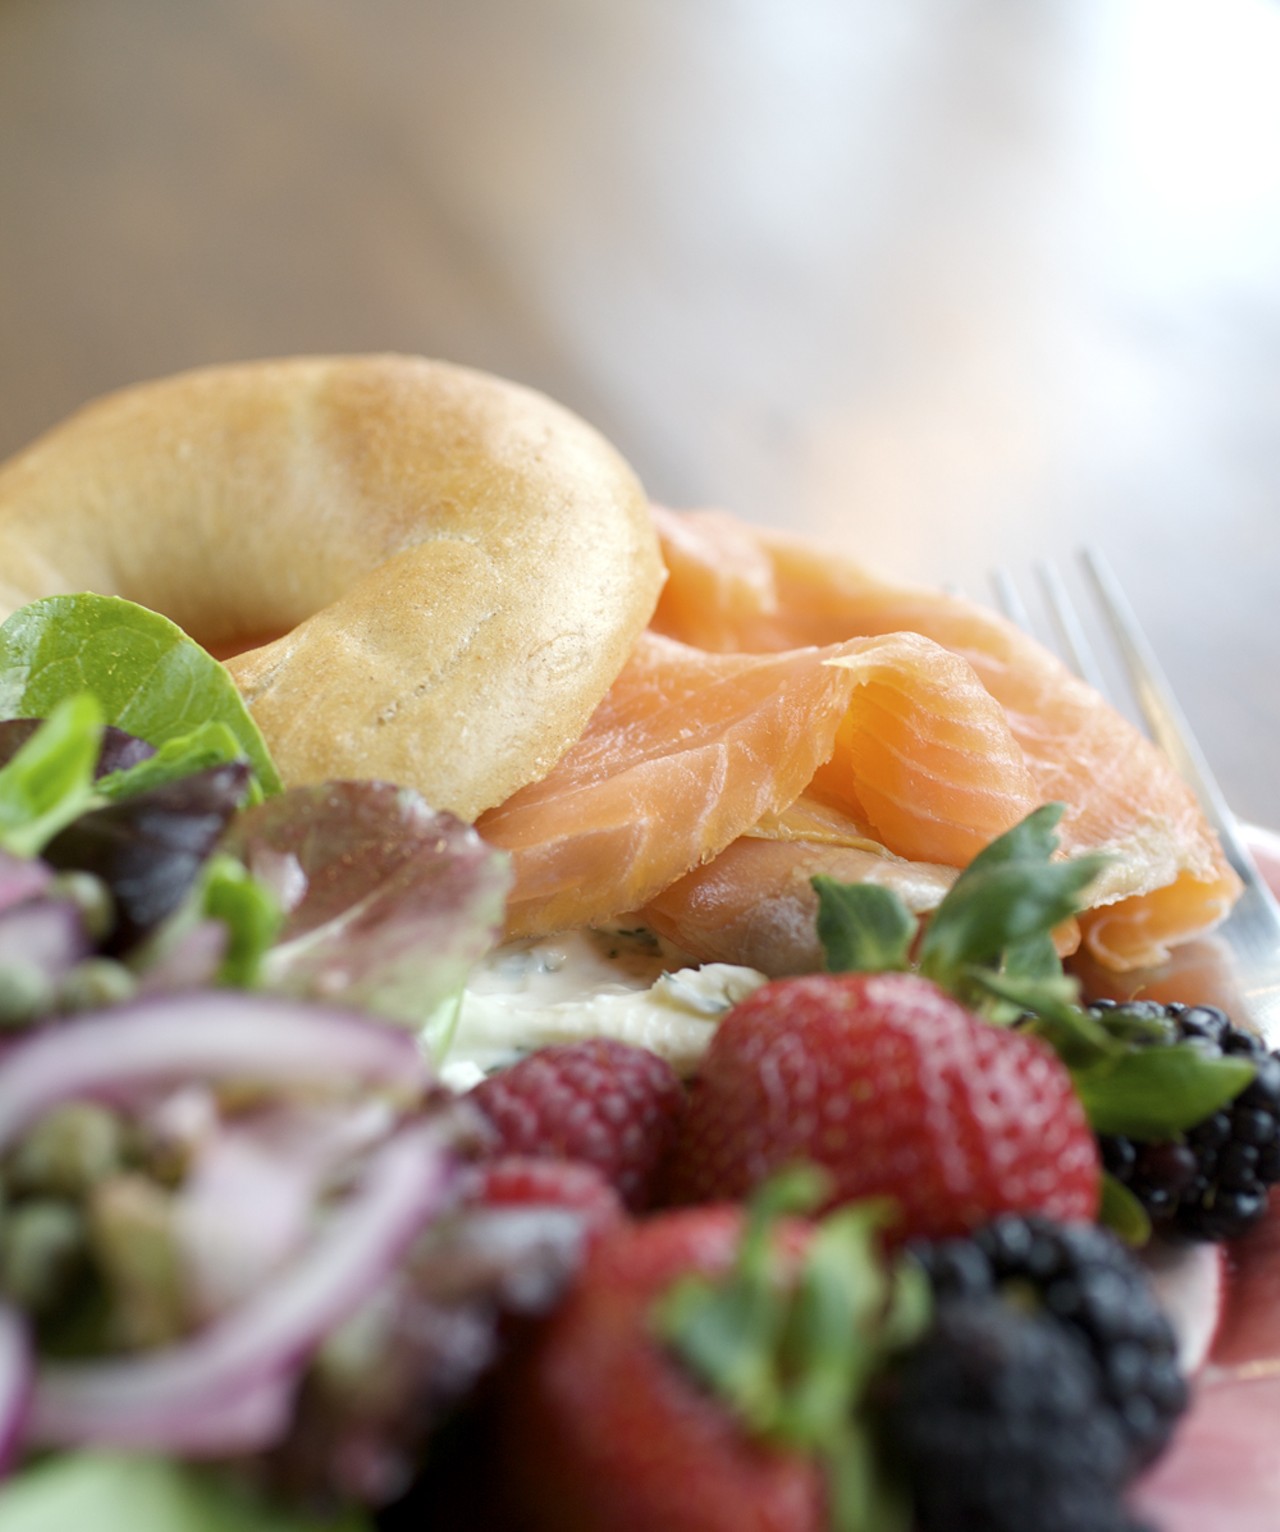 Another savory breakfast option is the house-made rye bagel with smoked salmon, herbed cream cheese, onions, capers and fresh berries.